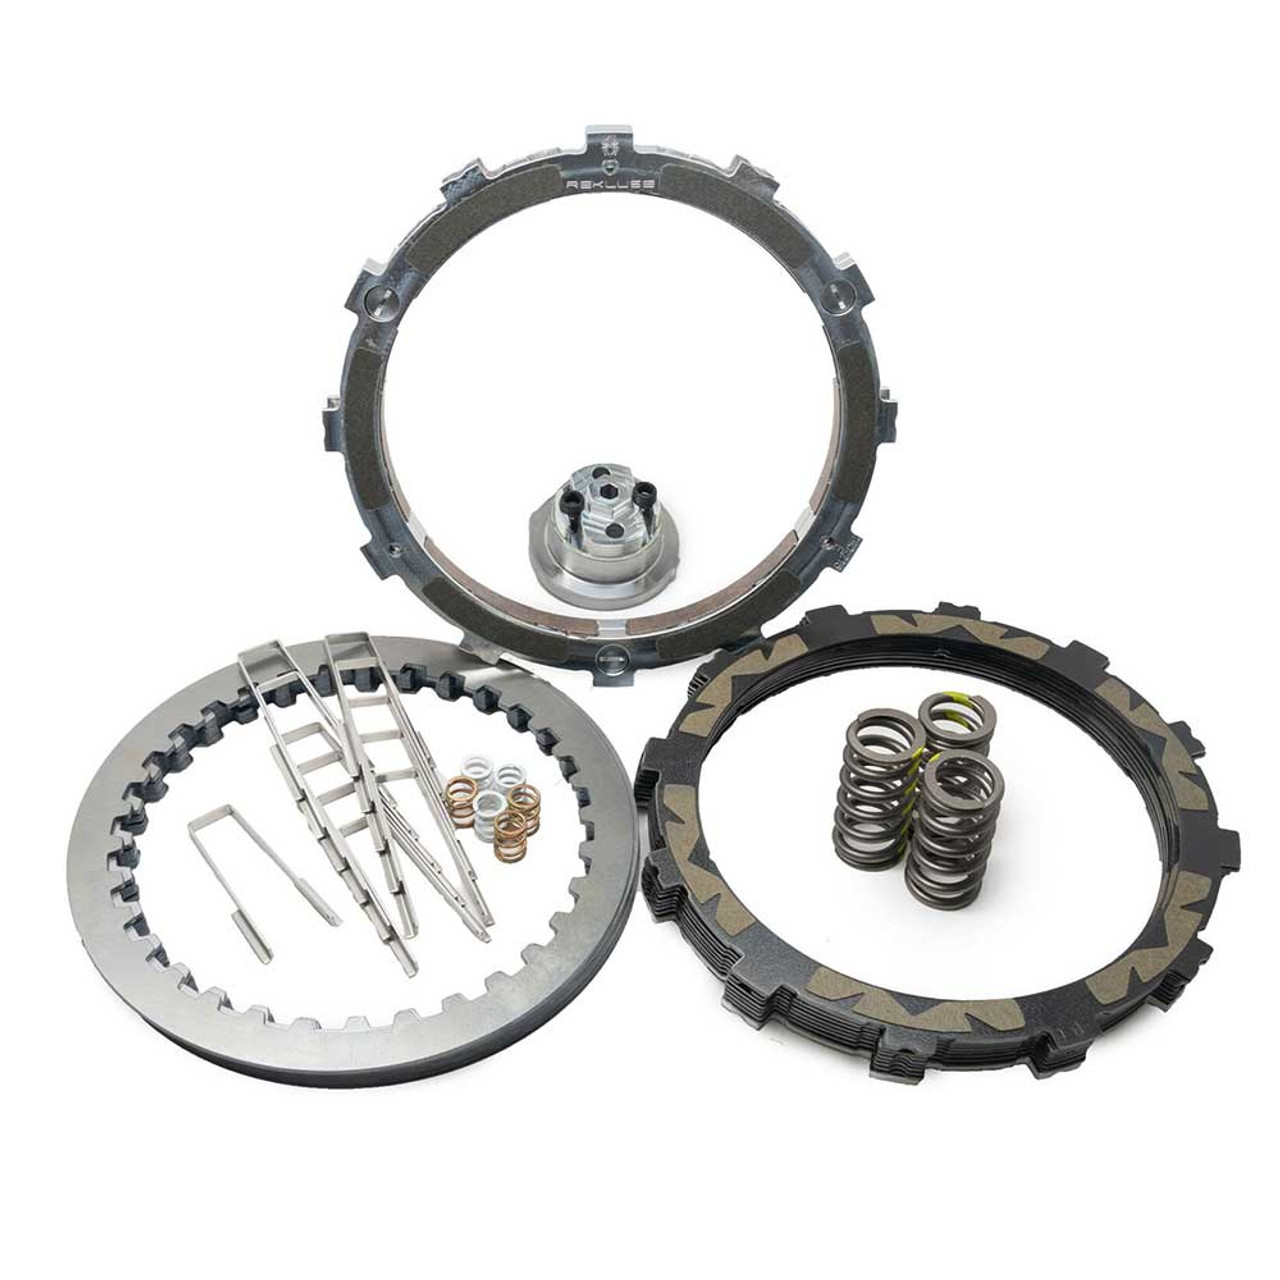 Rekluse Radiusx Auto Clutch Assembly With Torqdrive And Exp Technologies Fits 18 Up Harley Softail Models Fl Fx Made In Usa Rms 68